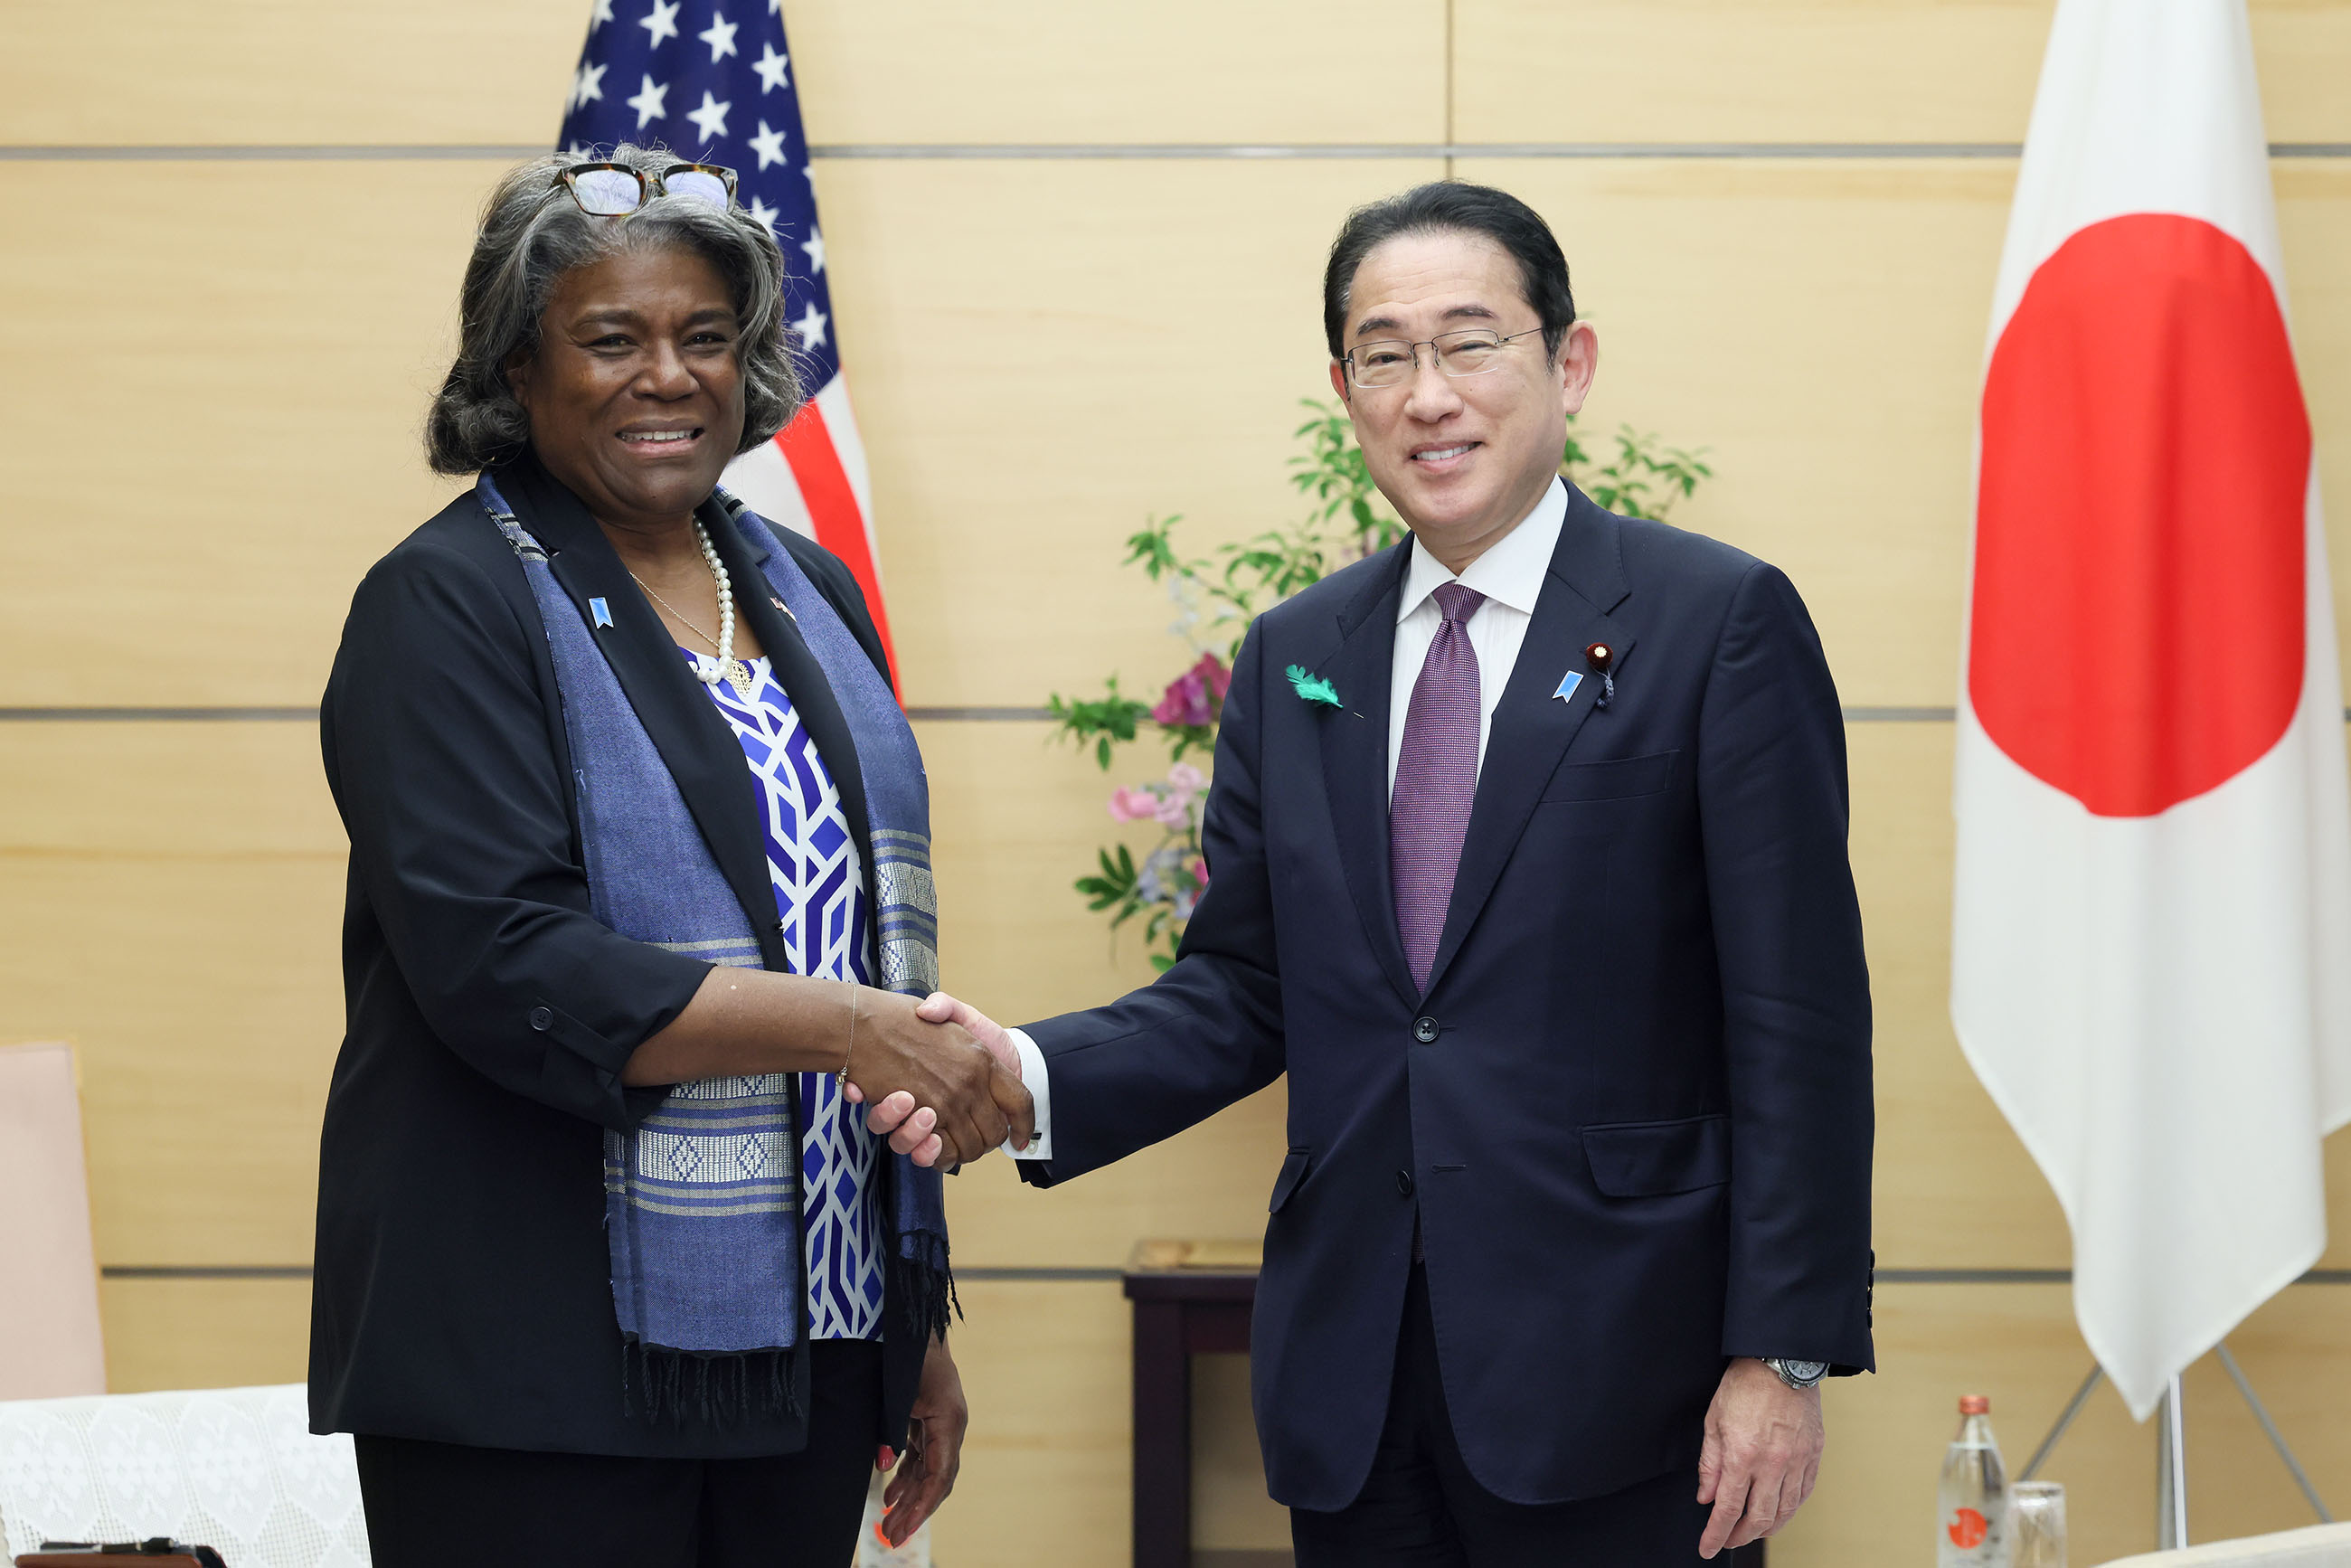 Courtesy Call from Ambassador Thomas-Greenfield, Representative of the United States of America to the United Nations (UN)